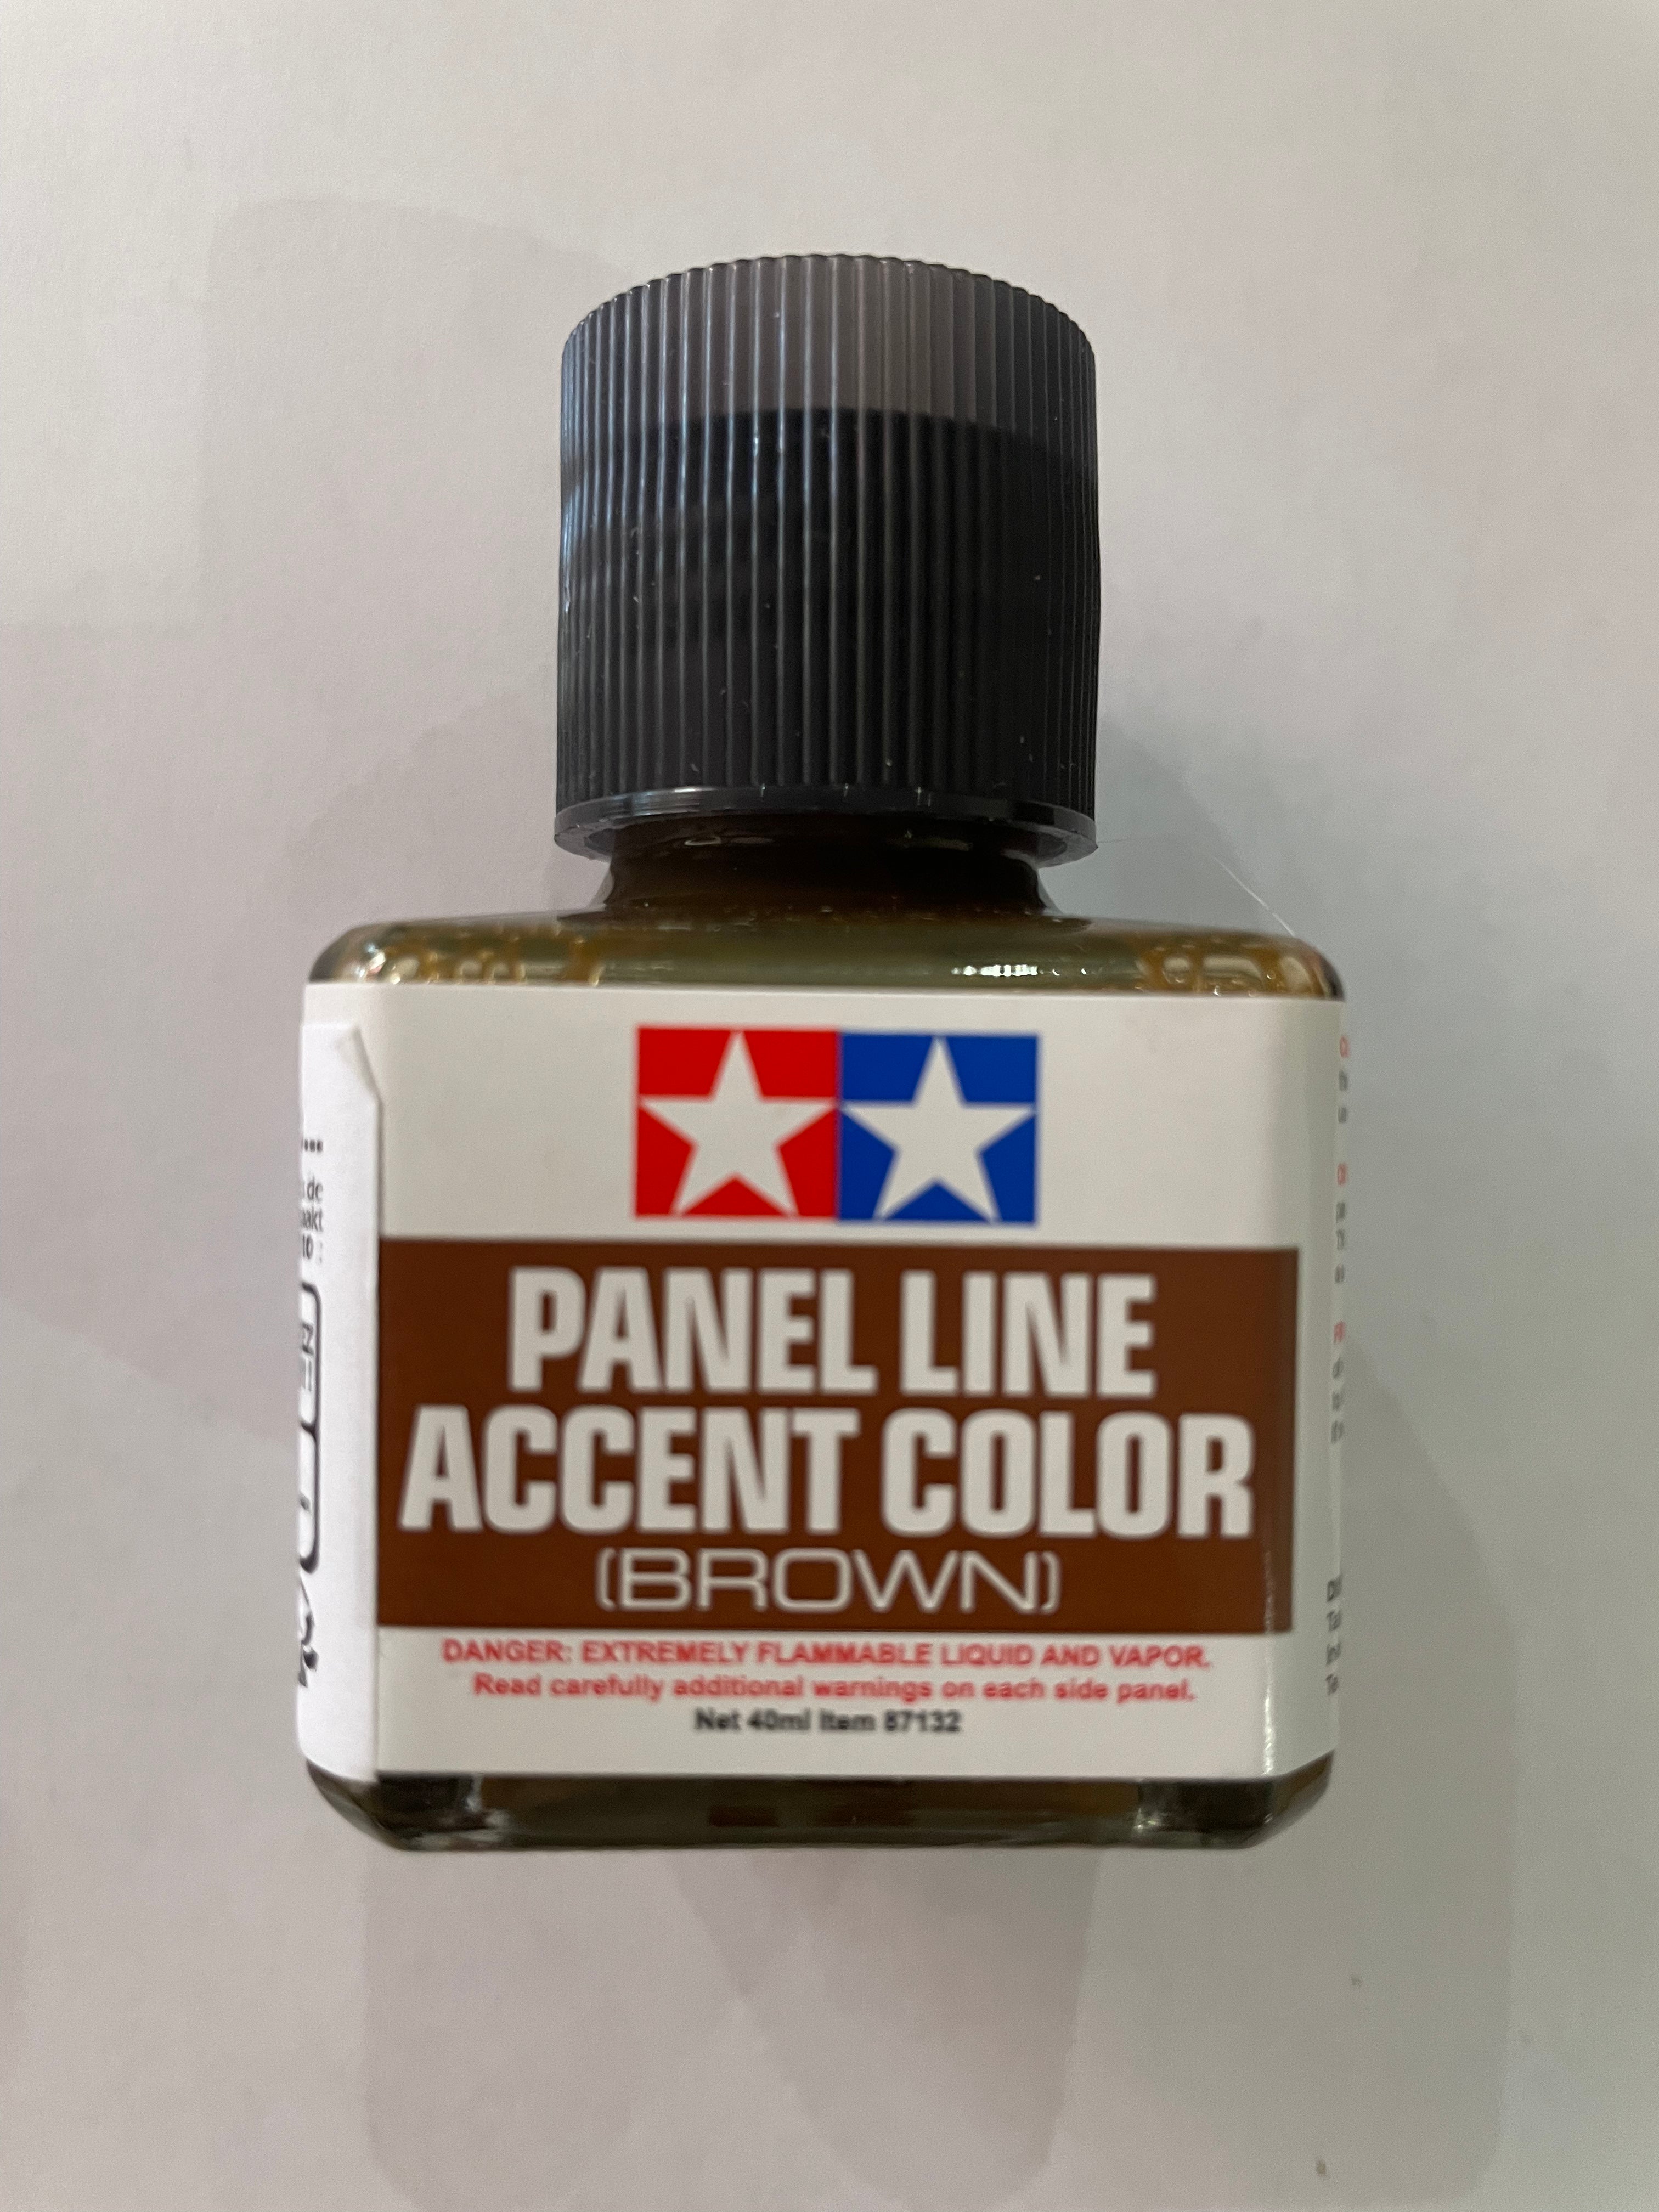 PANEL LINE ACCENT COLOR - BROWN (40ML) – dmodelkits